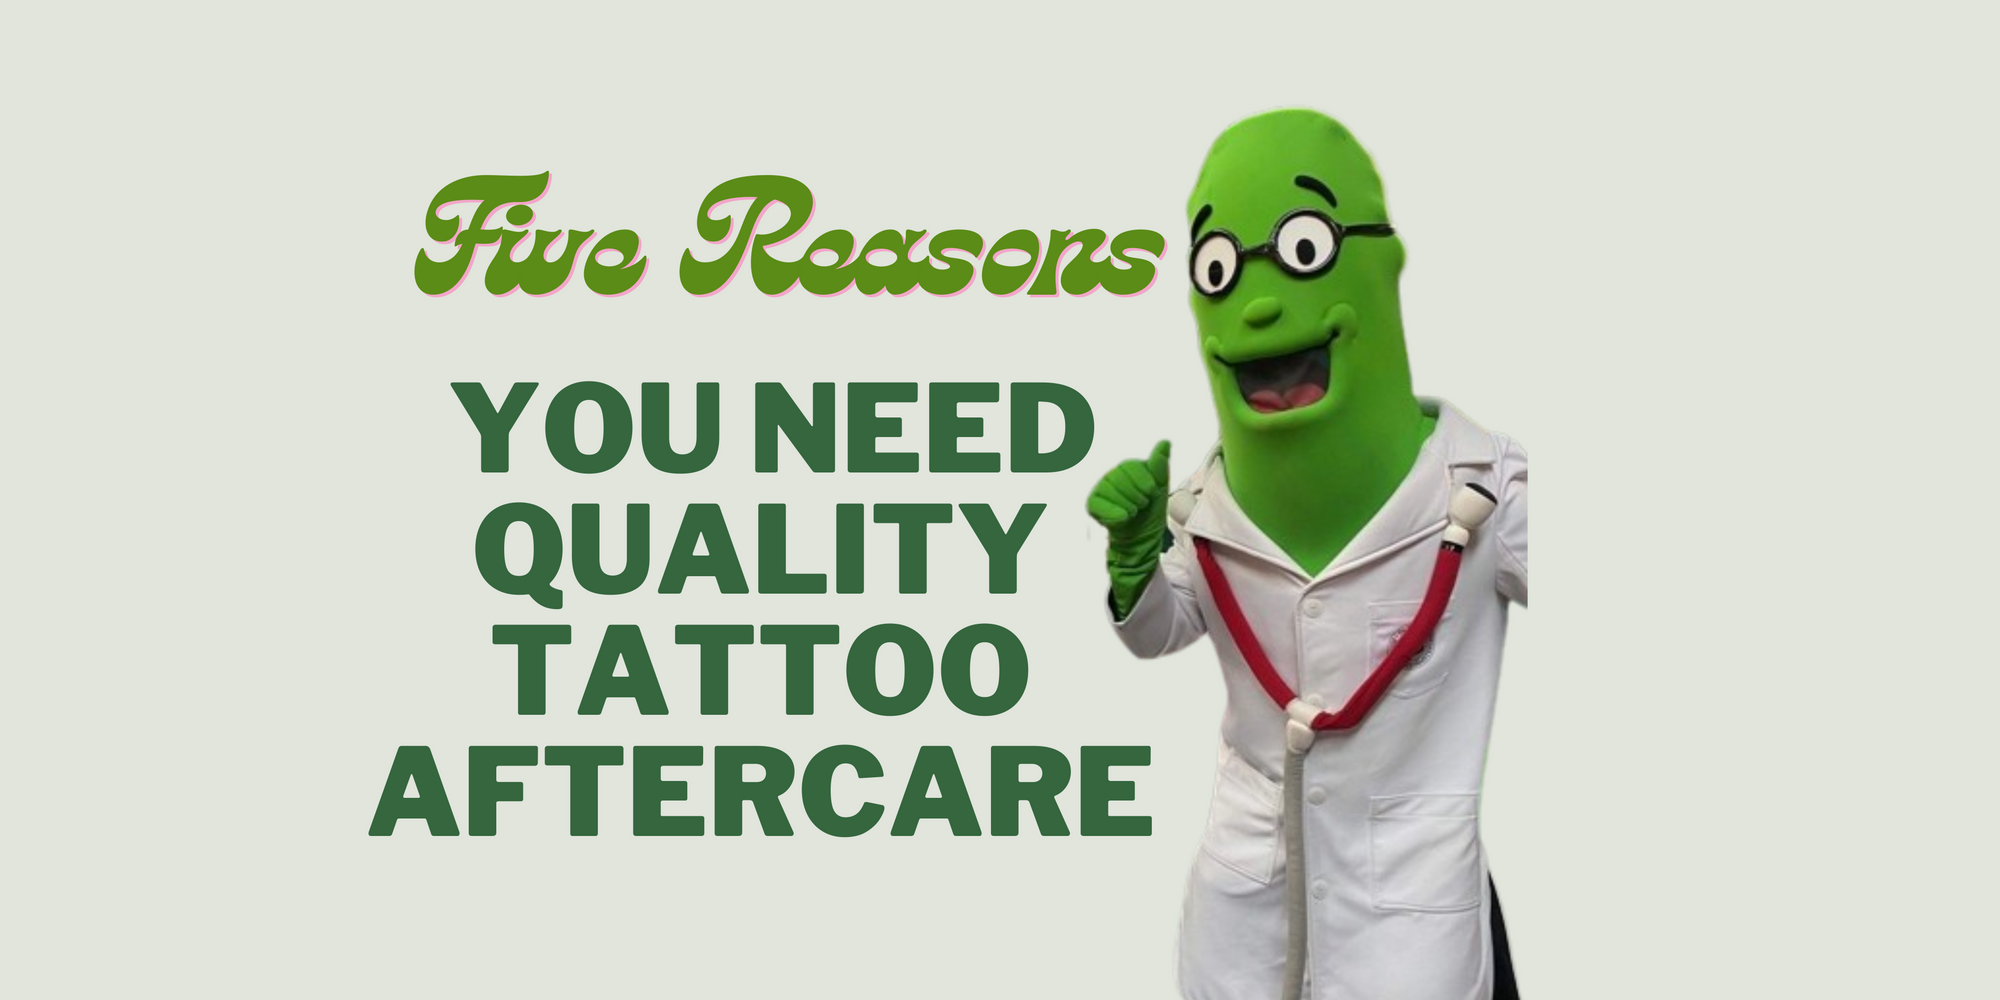 5 Reasons Why You Need Quality Tattoo Aftercare